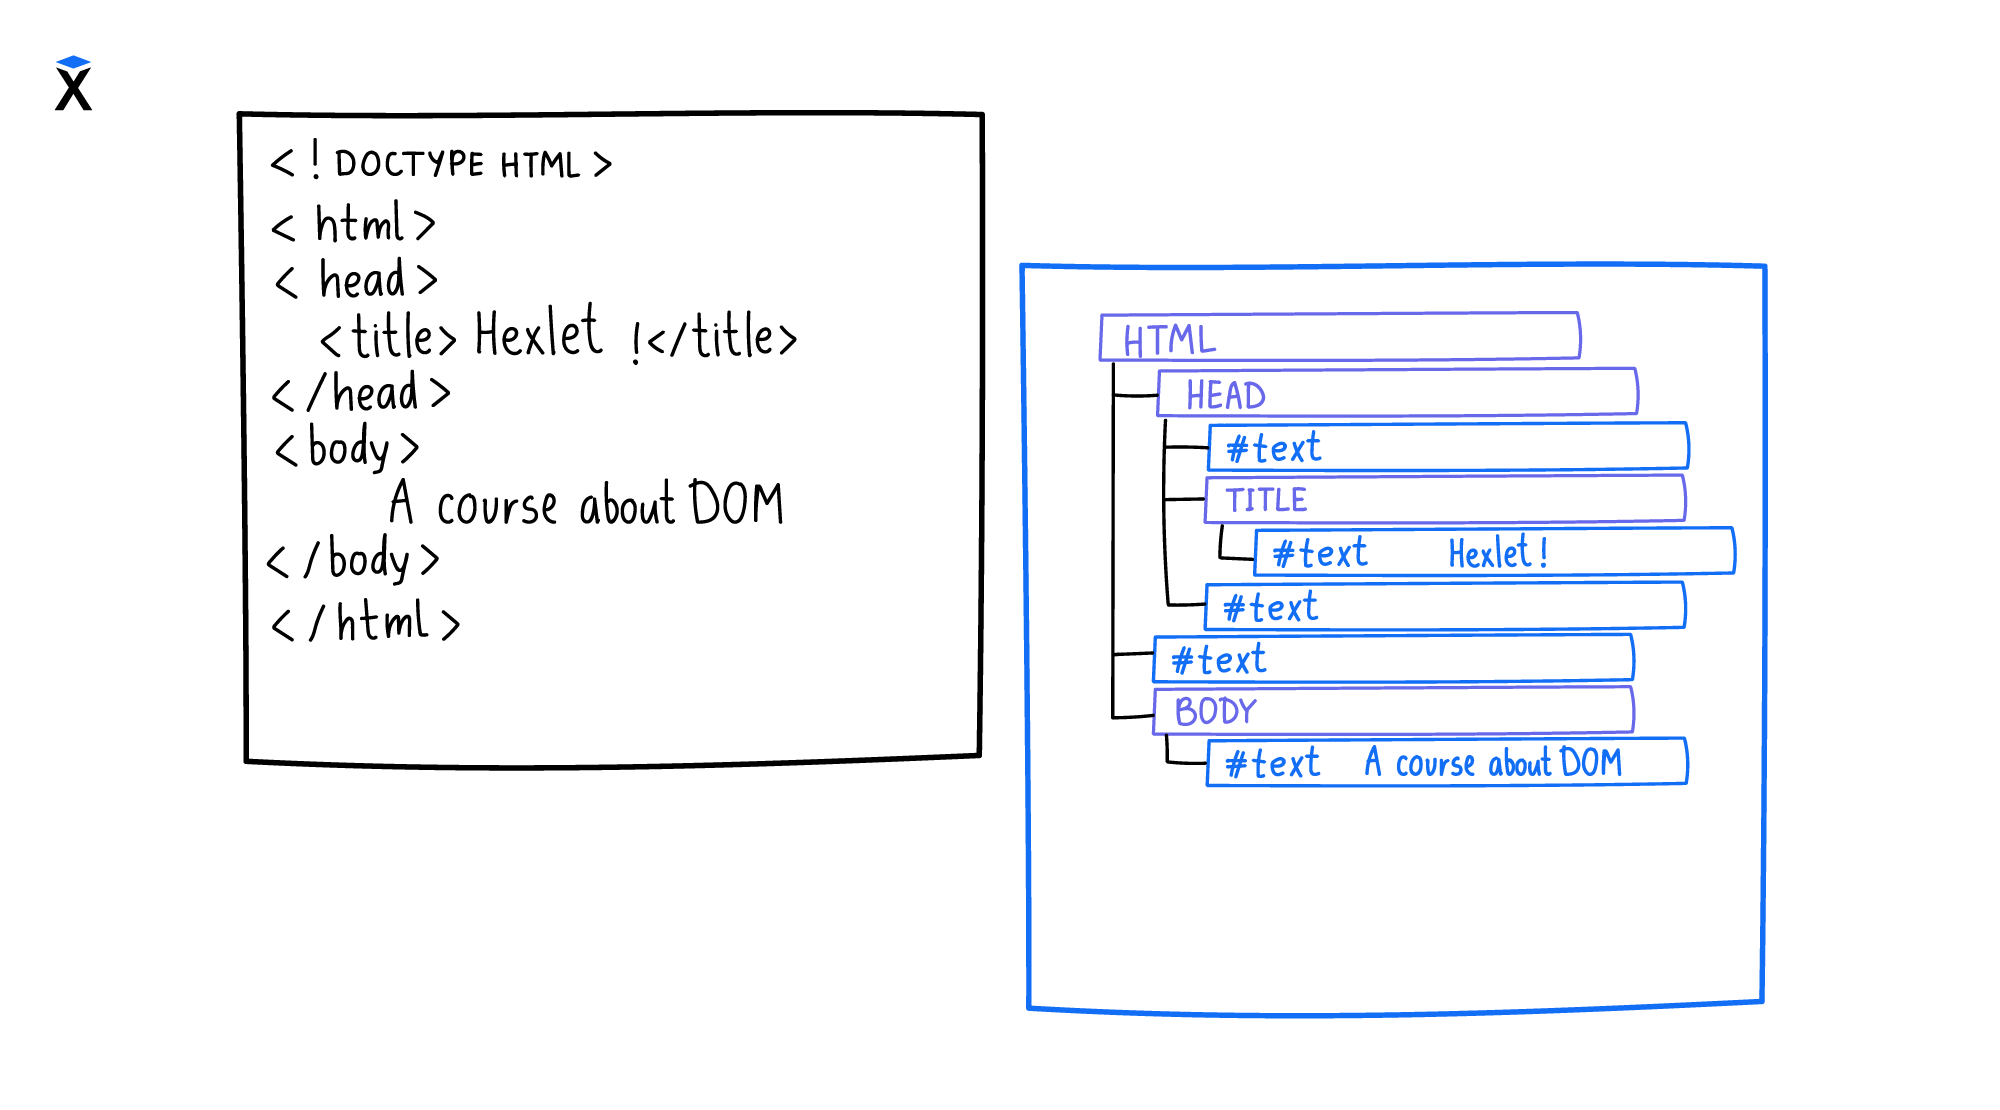 The connection between HTML and DOM